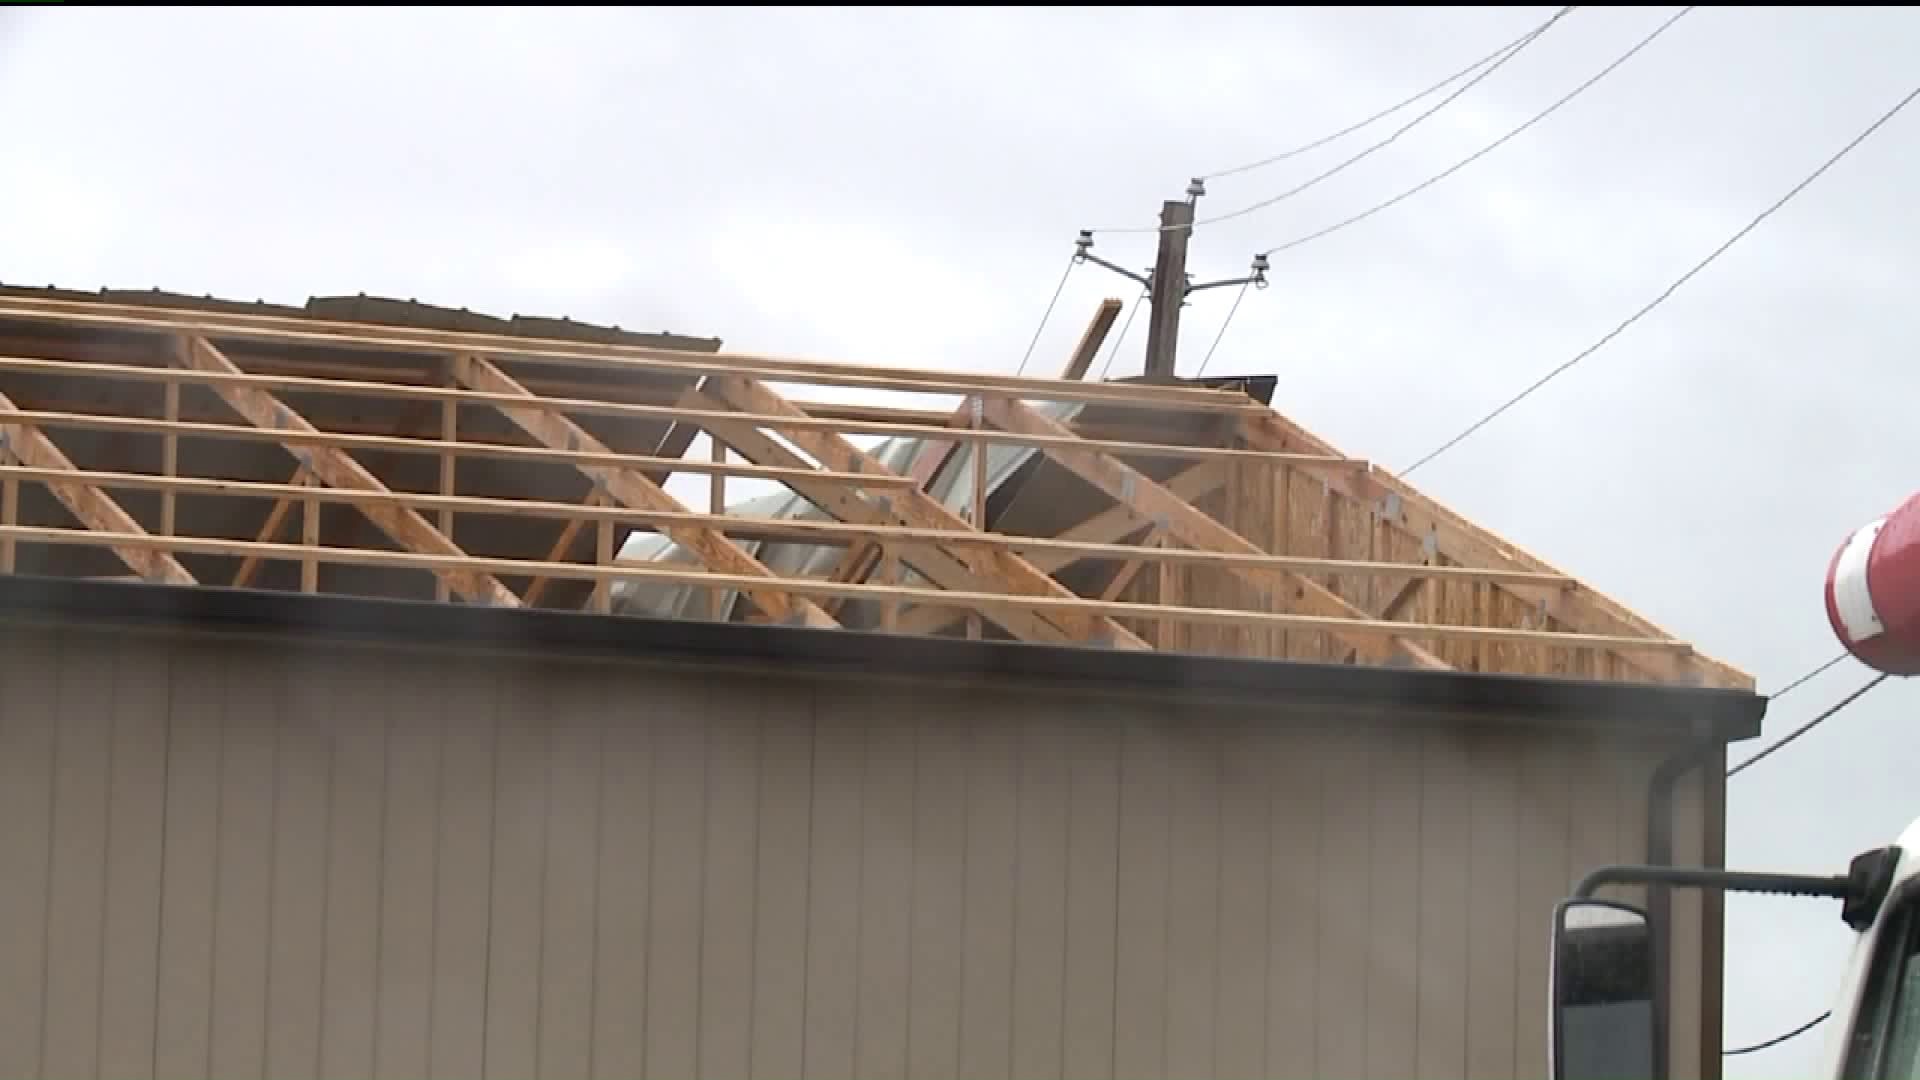 Debris Blown off Roof Blamed for Power Outage in Luzerne County